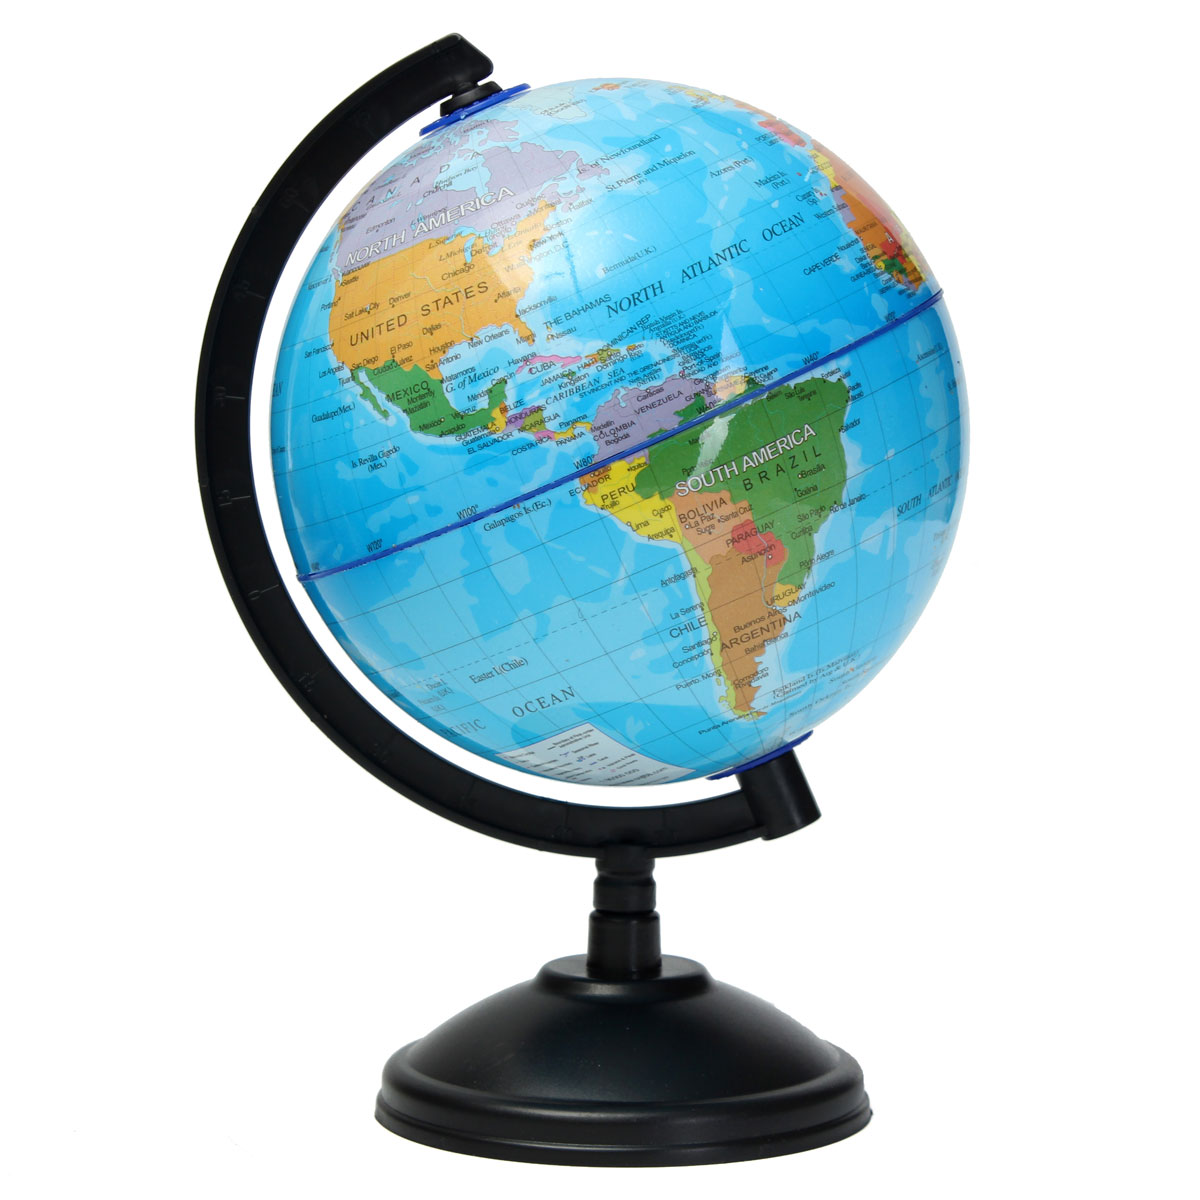 14cm-World-Globe-Atlas-Map-With-Swivel-Stand-Geography-Educational-Toy-Kids-Gift-1028037